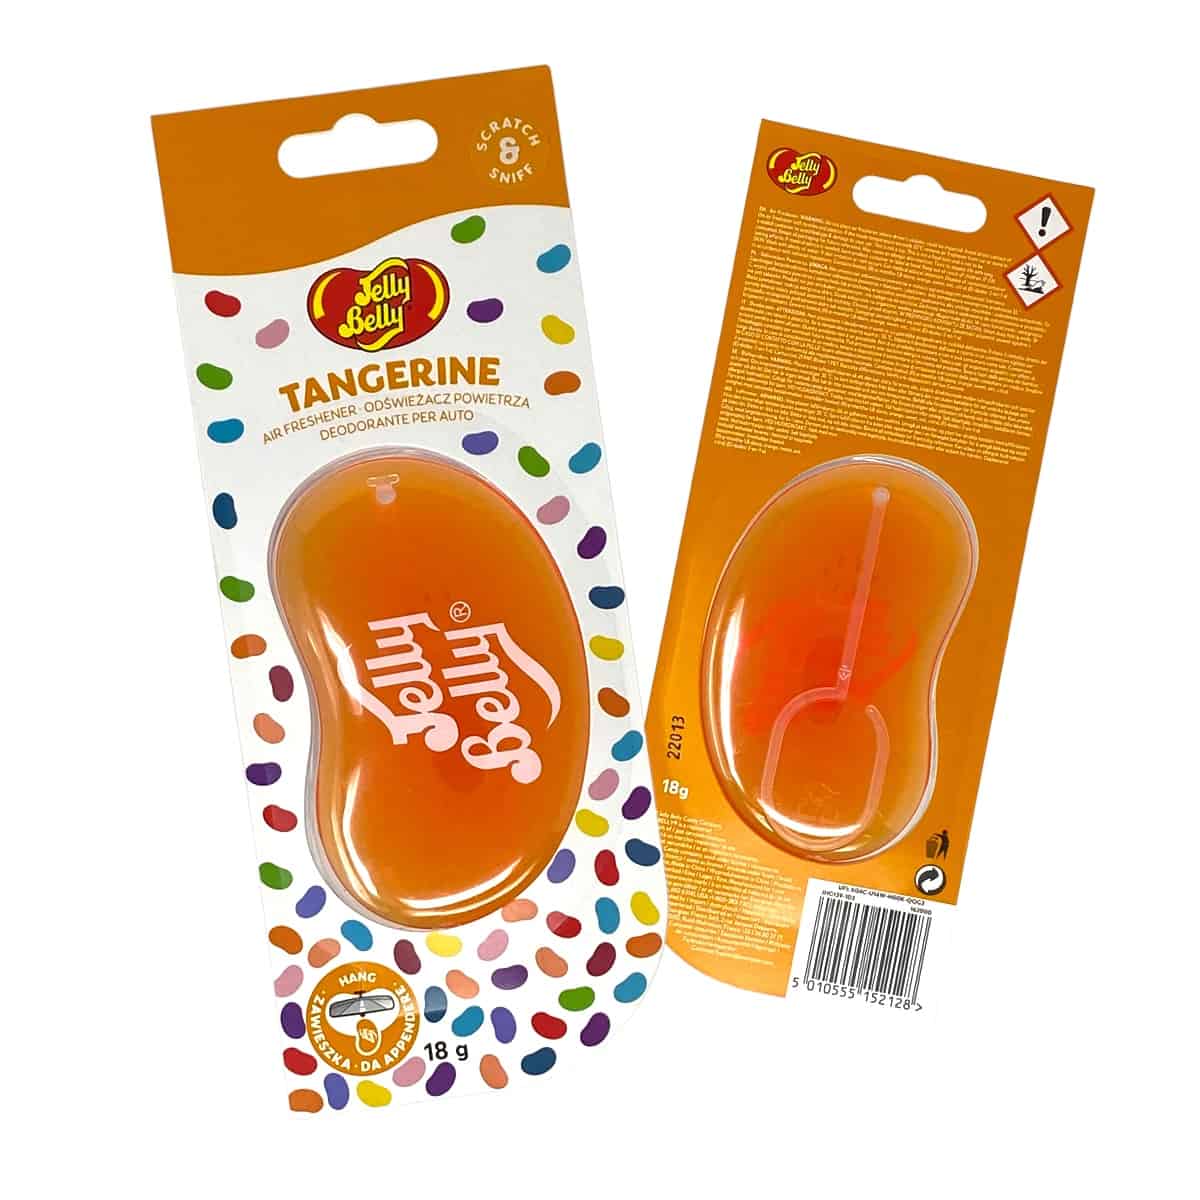 The Jelly Belly 3D Gel hanging car & home air freshener is known for its superior scent strength. It packs a punch when it comes to fragrance, ensuring that your car journey or home is always a delightful sensory experience. With its vibrant tangerine scent, you'll be greeted by a refreshing burst of citrus every time you step into your car or walk through the door.